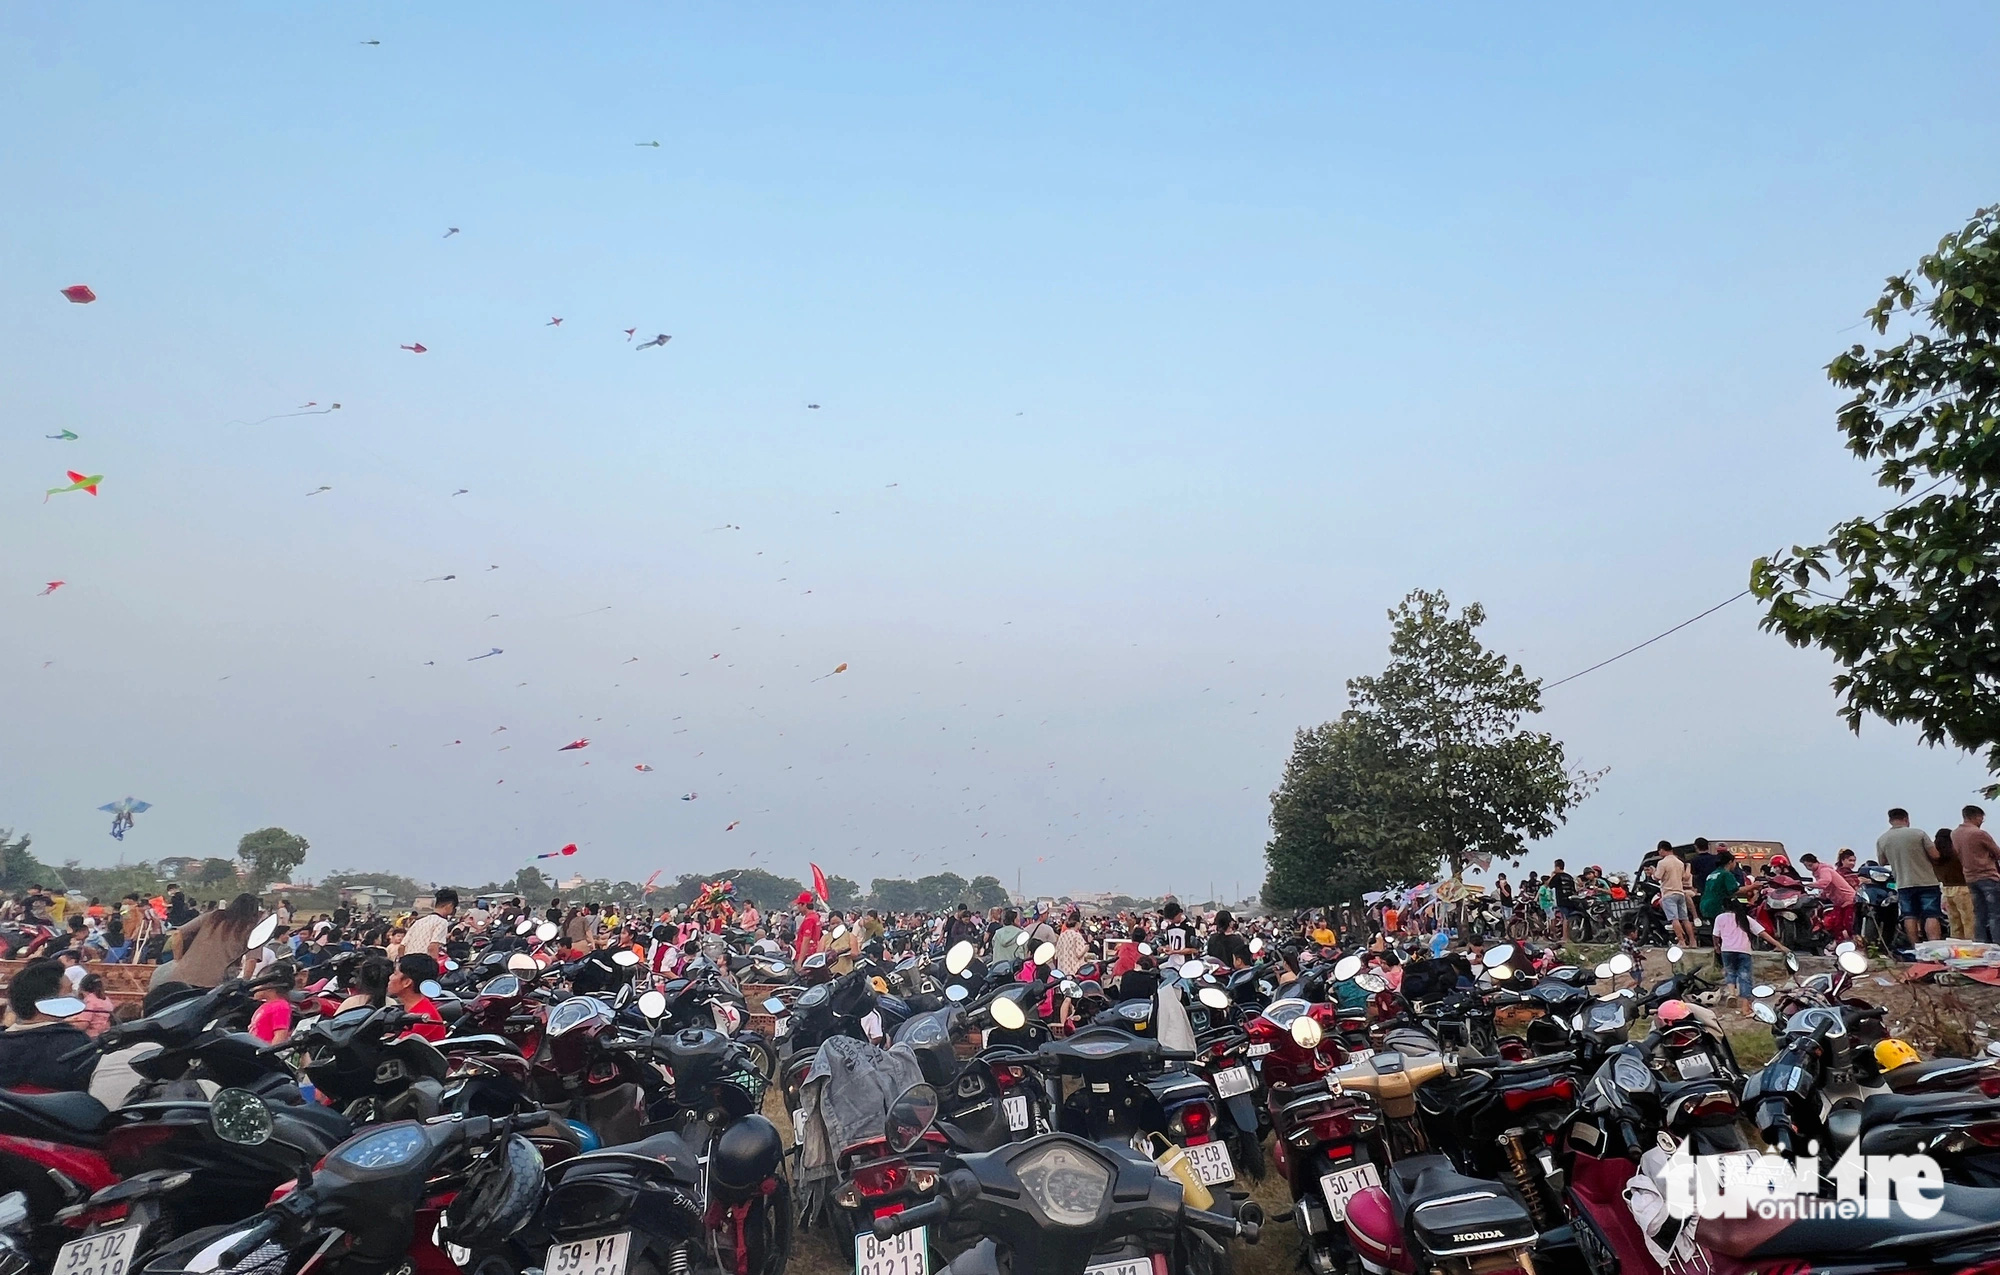 Motorbikes parked by kite fliers at a field along Nguyen Thi Danh Road in the suburban district of Hoc Mon, Ho Chi Minh City. Photo: Yen Trinh / Tuoi Tre